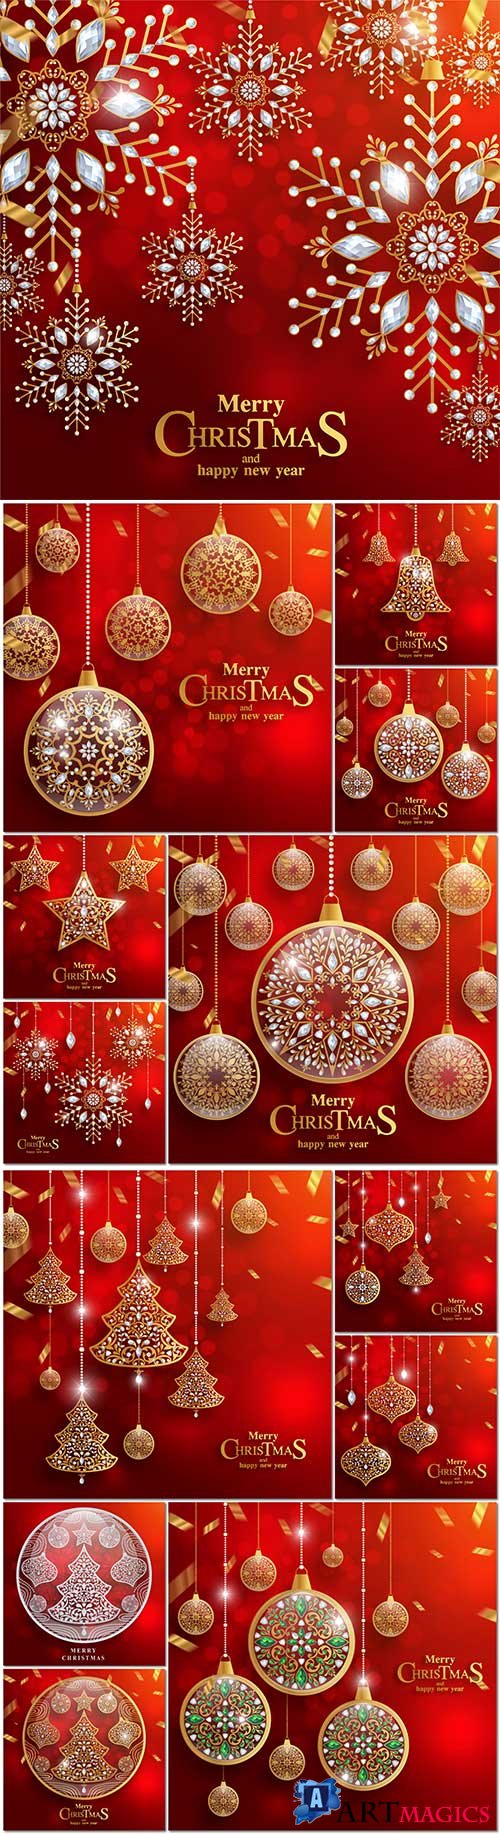 Merry christmas and happy new year with gold patterned and crystals on paper color in vector